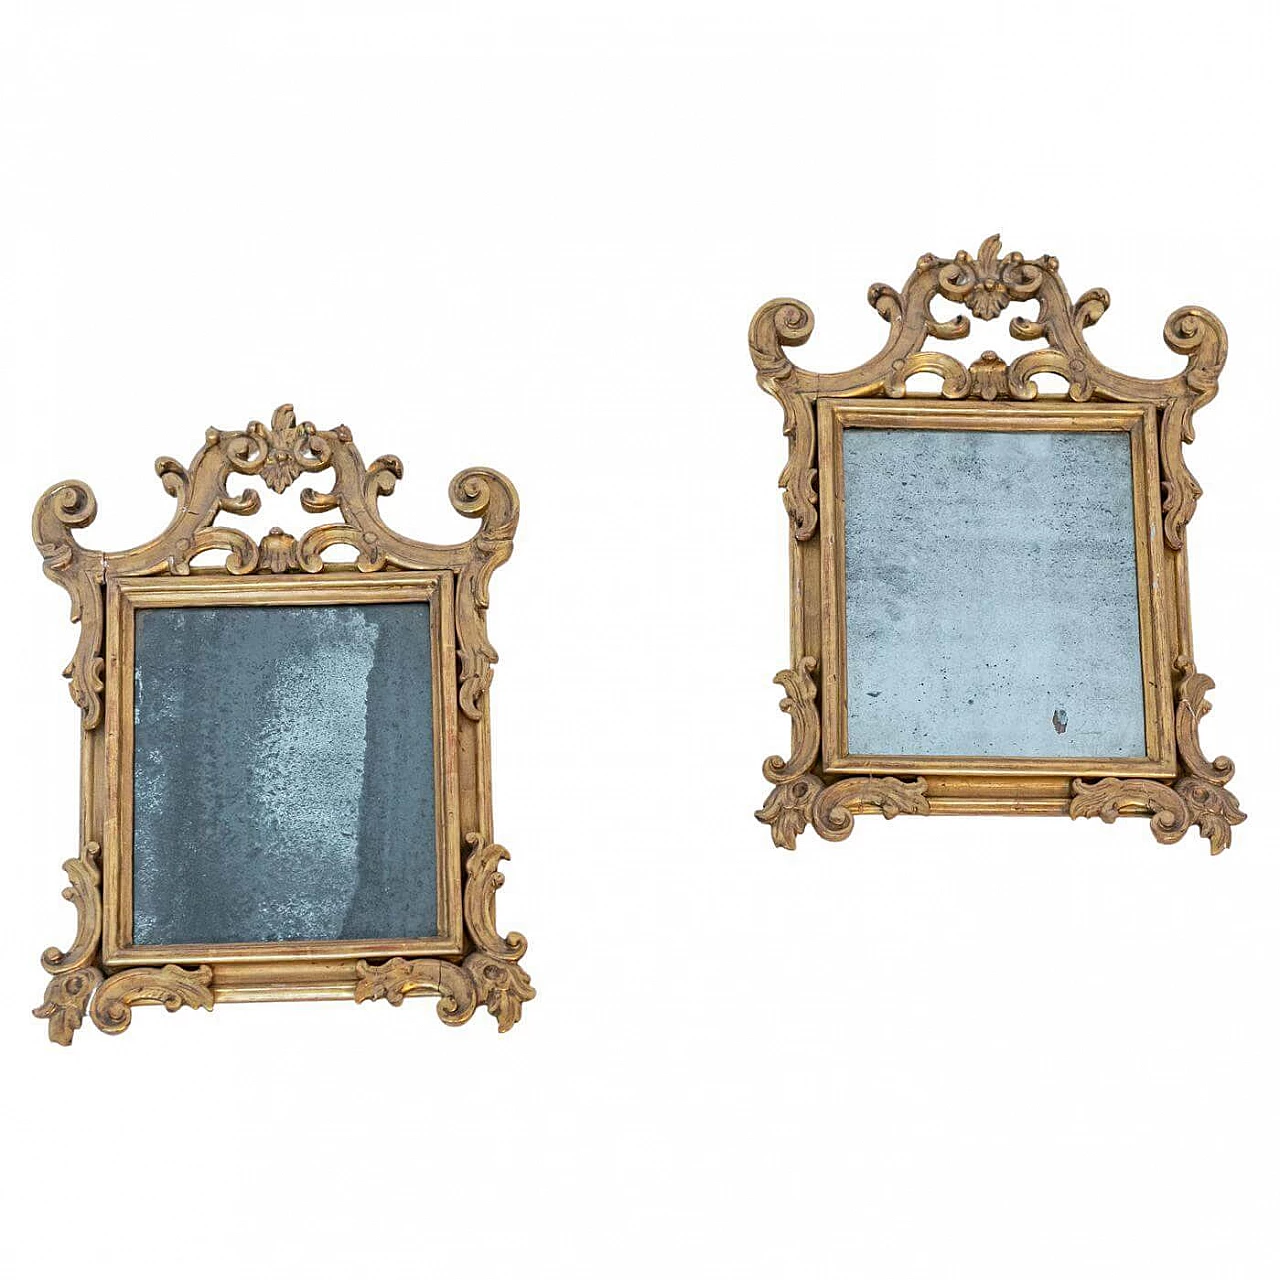 Pair of mirrors with gilded wooden frames, 18th century 1405549